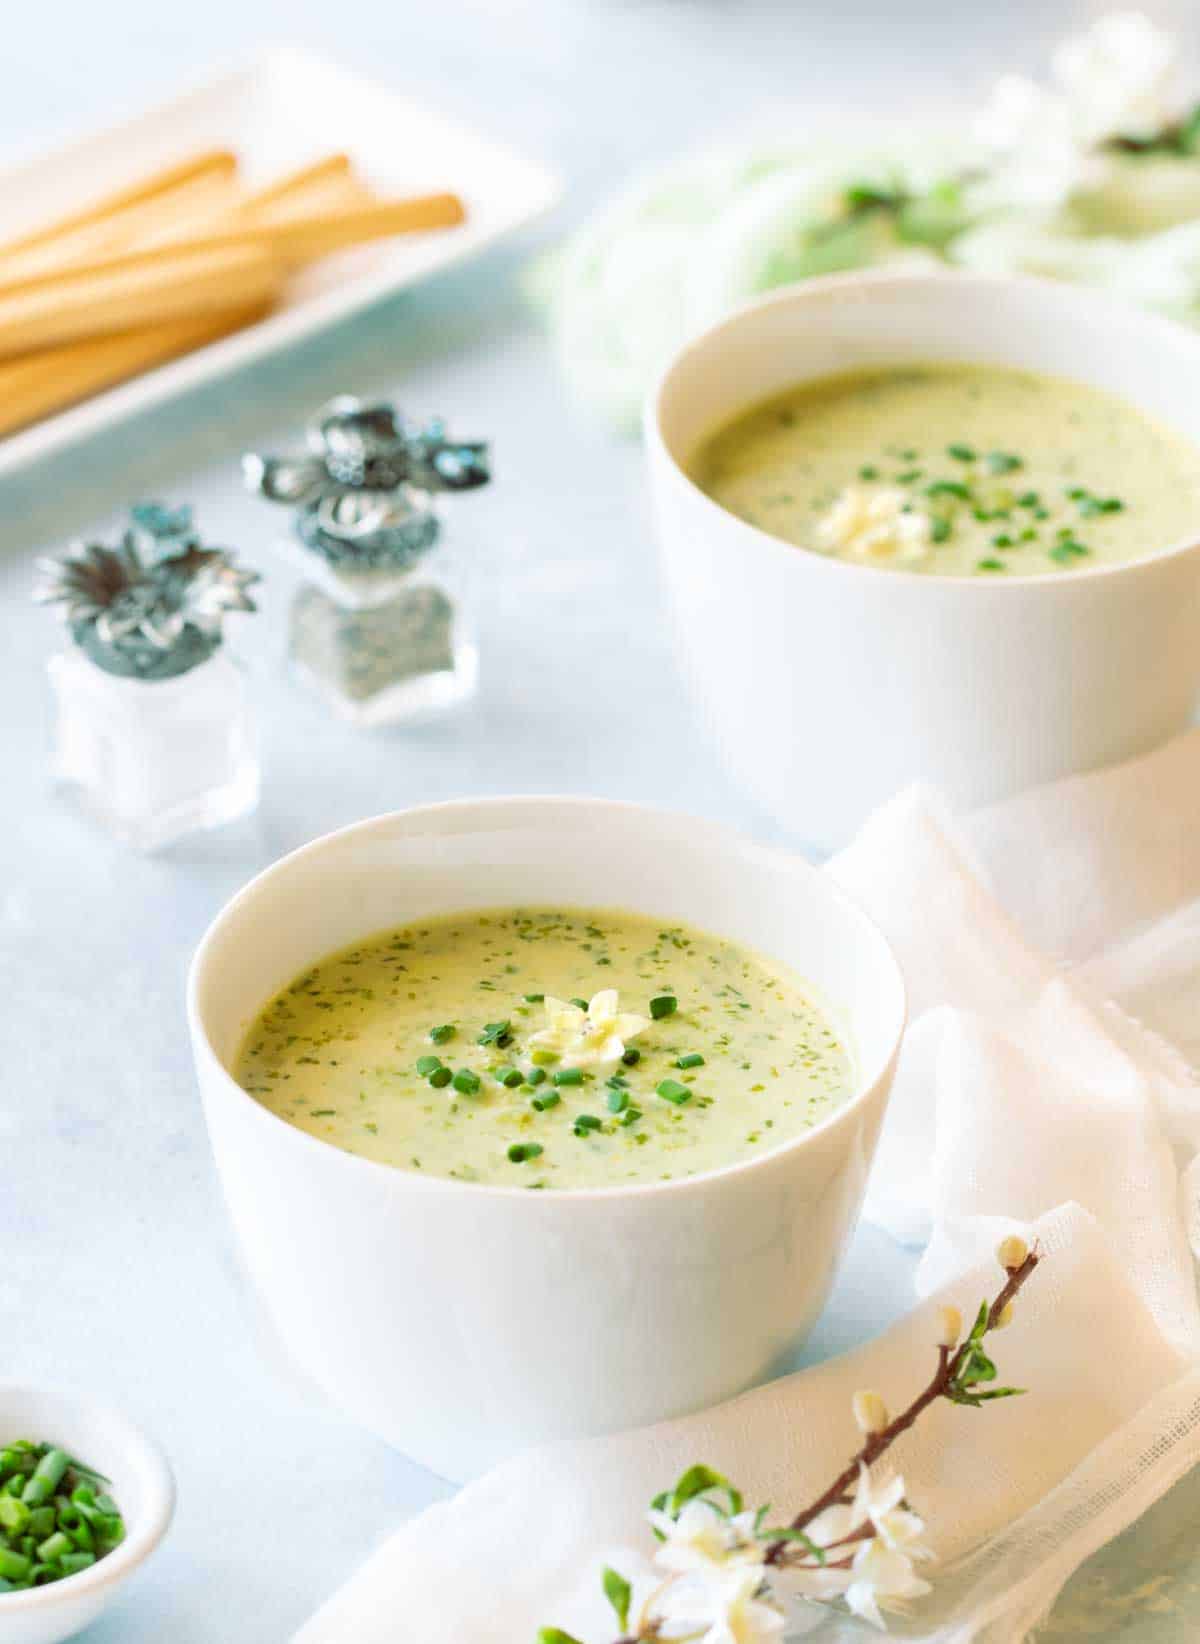 Two white bowls each holding a portion of Puréed Grean Pea Soup, with small salt and pepper shakers on the side